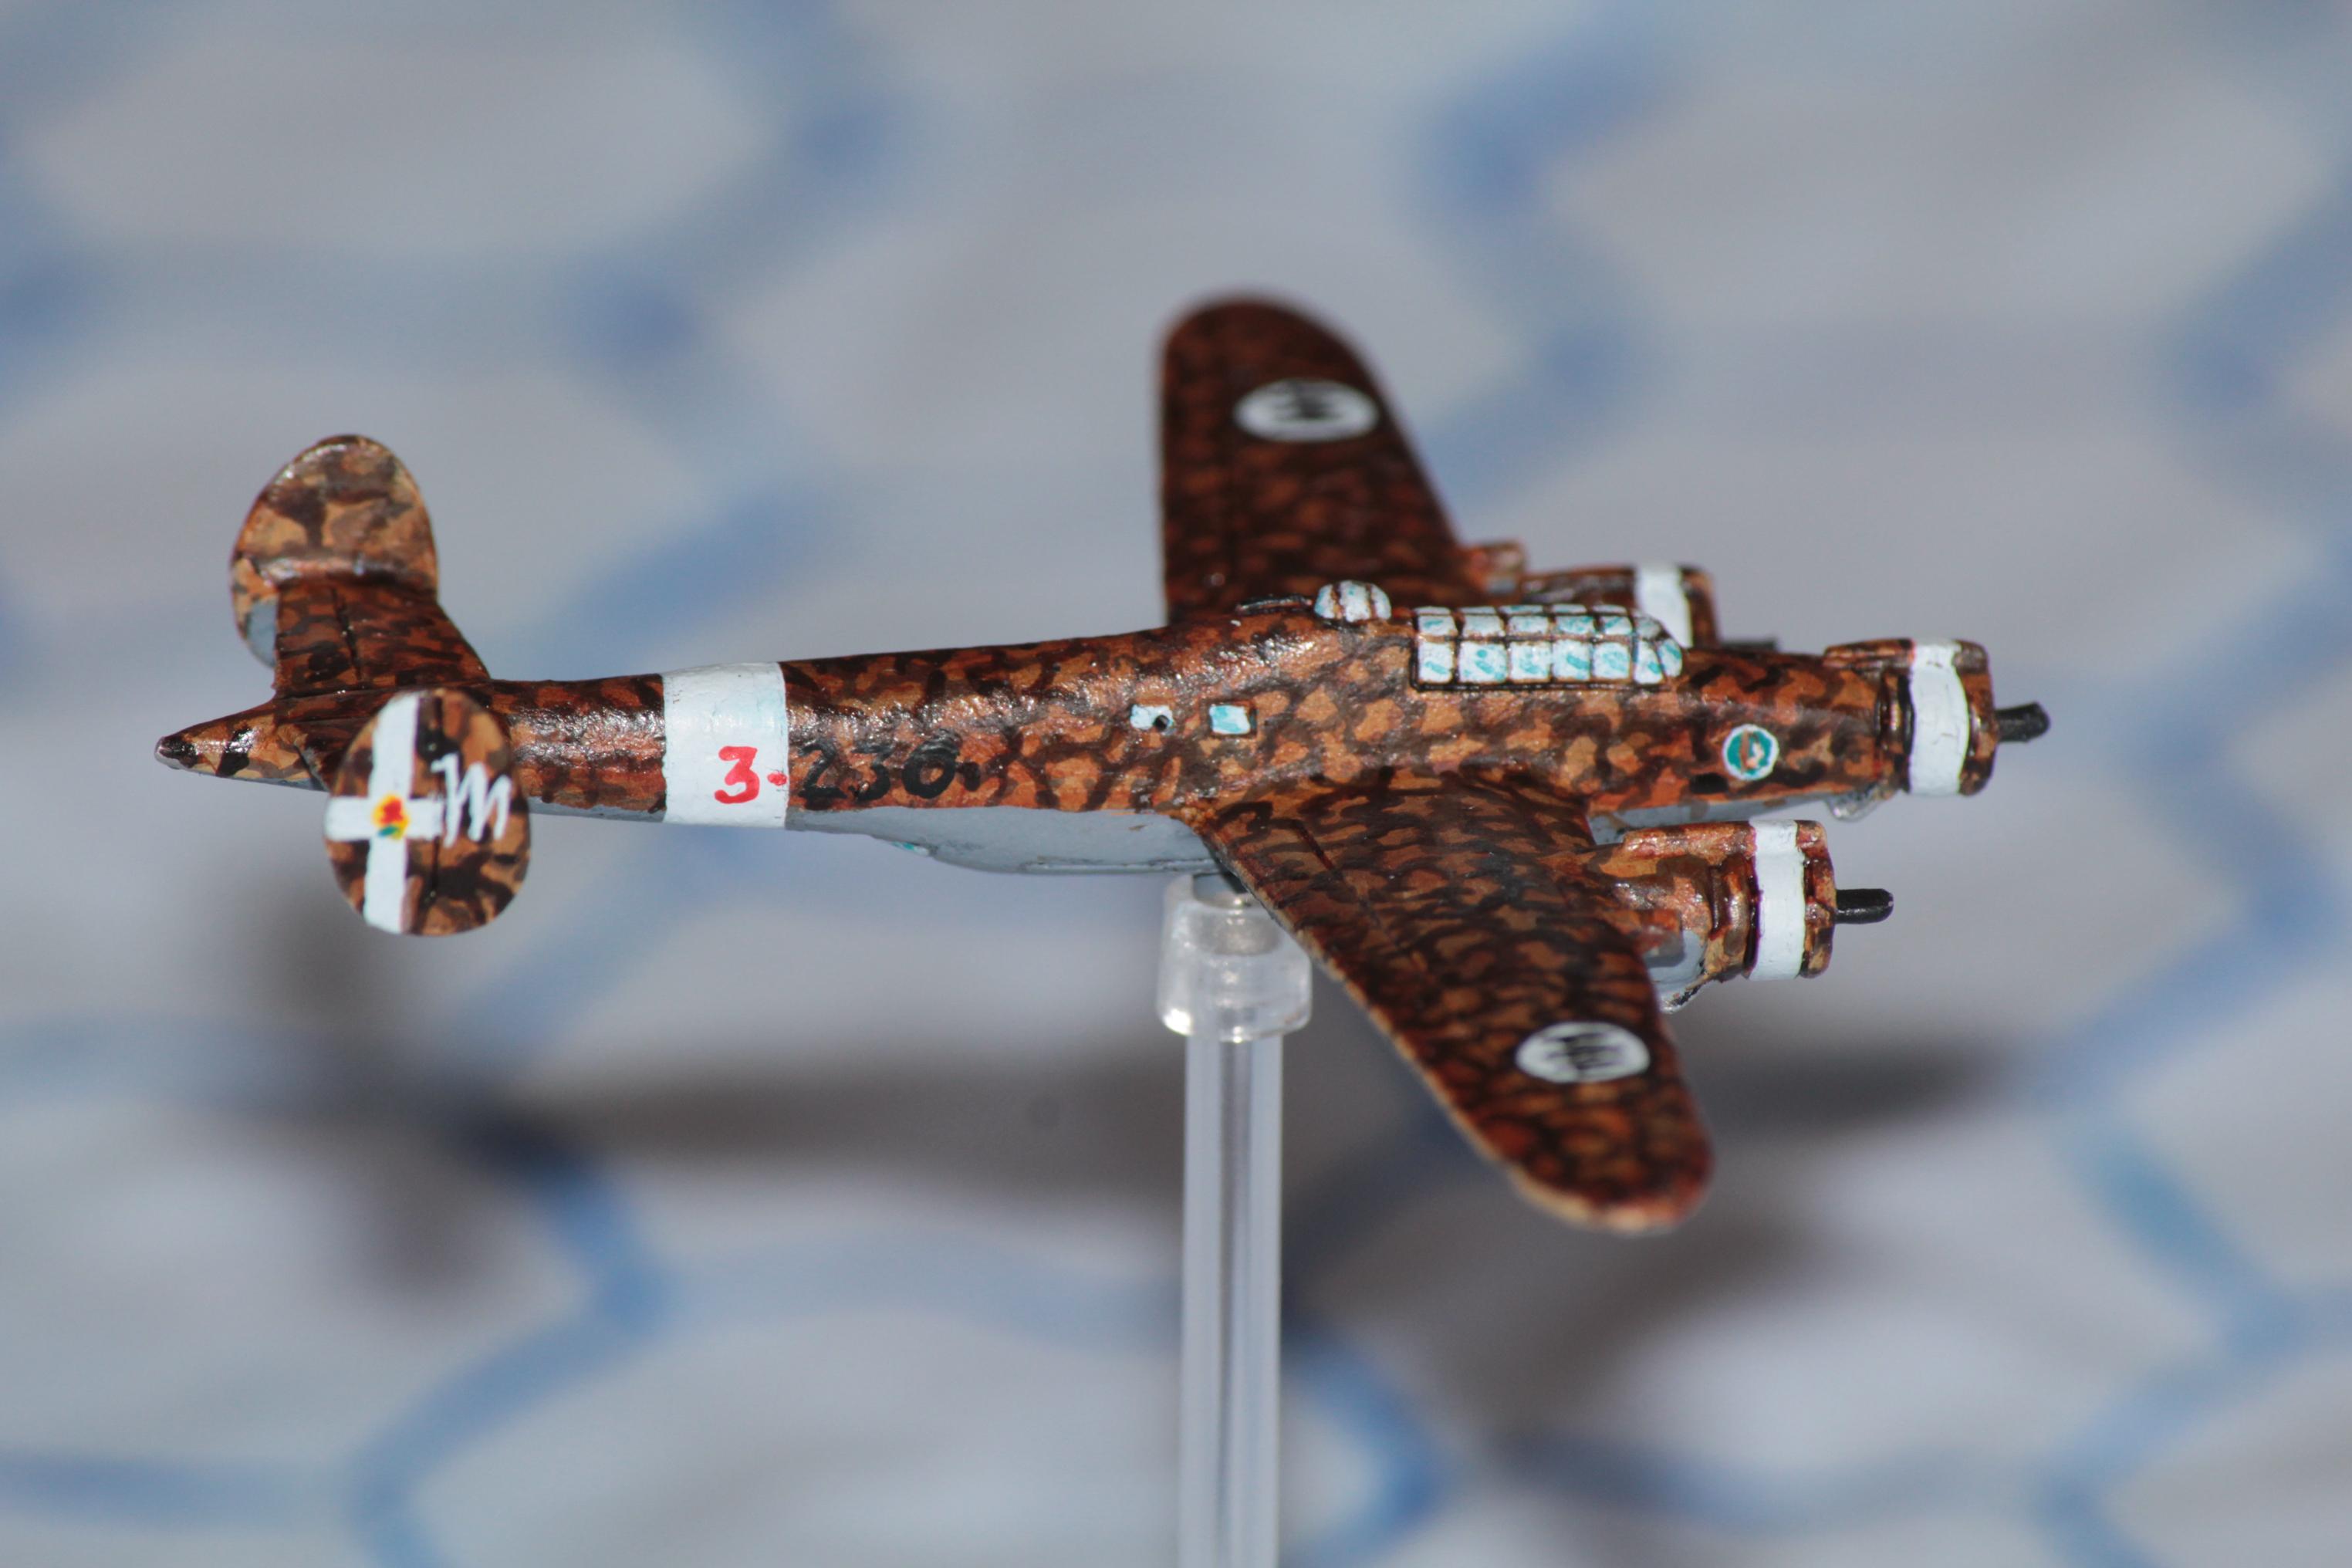 1:300 Scale, 6mm Scale, Air Combat, Aircraft, Aviation, Finland, Fliers, French, Germans, Imperial Japan, Italian, Italy, Luftwaffe, Planes, Raf, Regia Aeronautica, Republic Of China, Soviet, Usaaf, World War 2